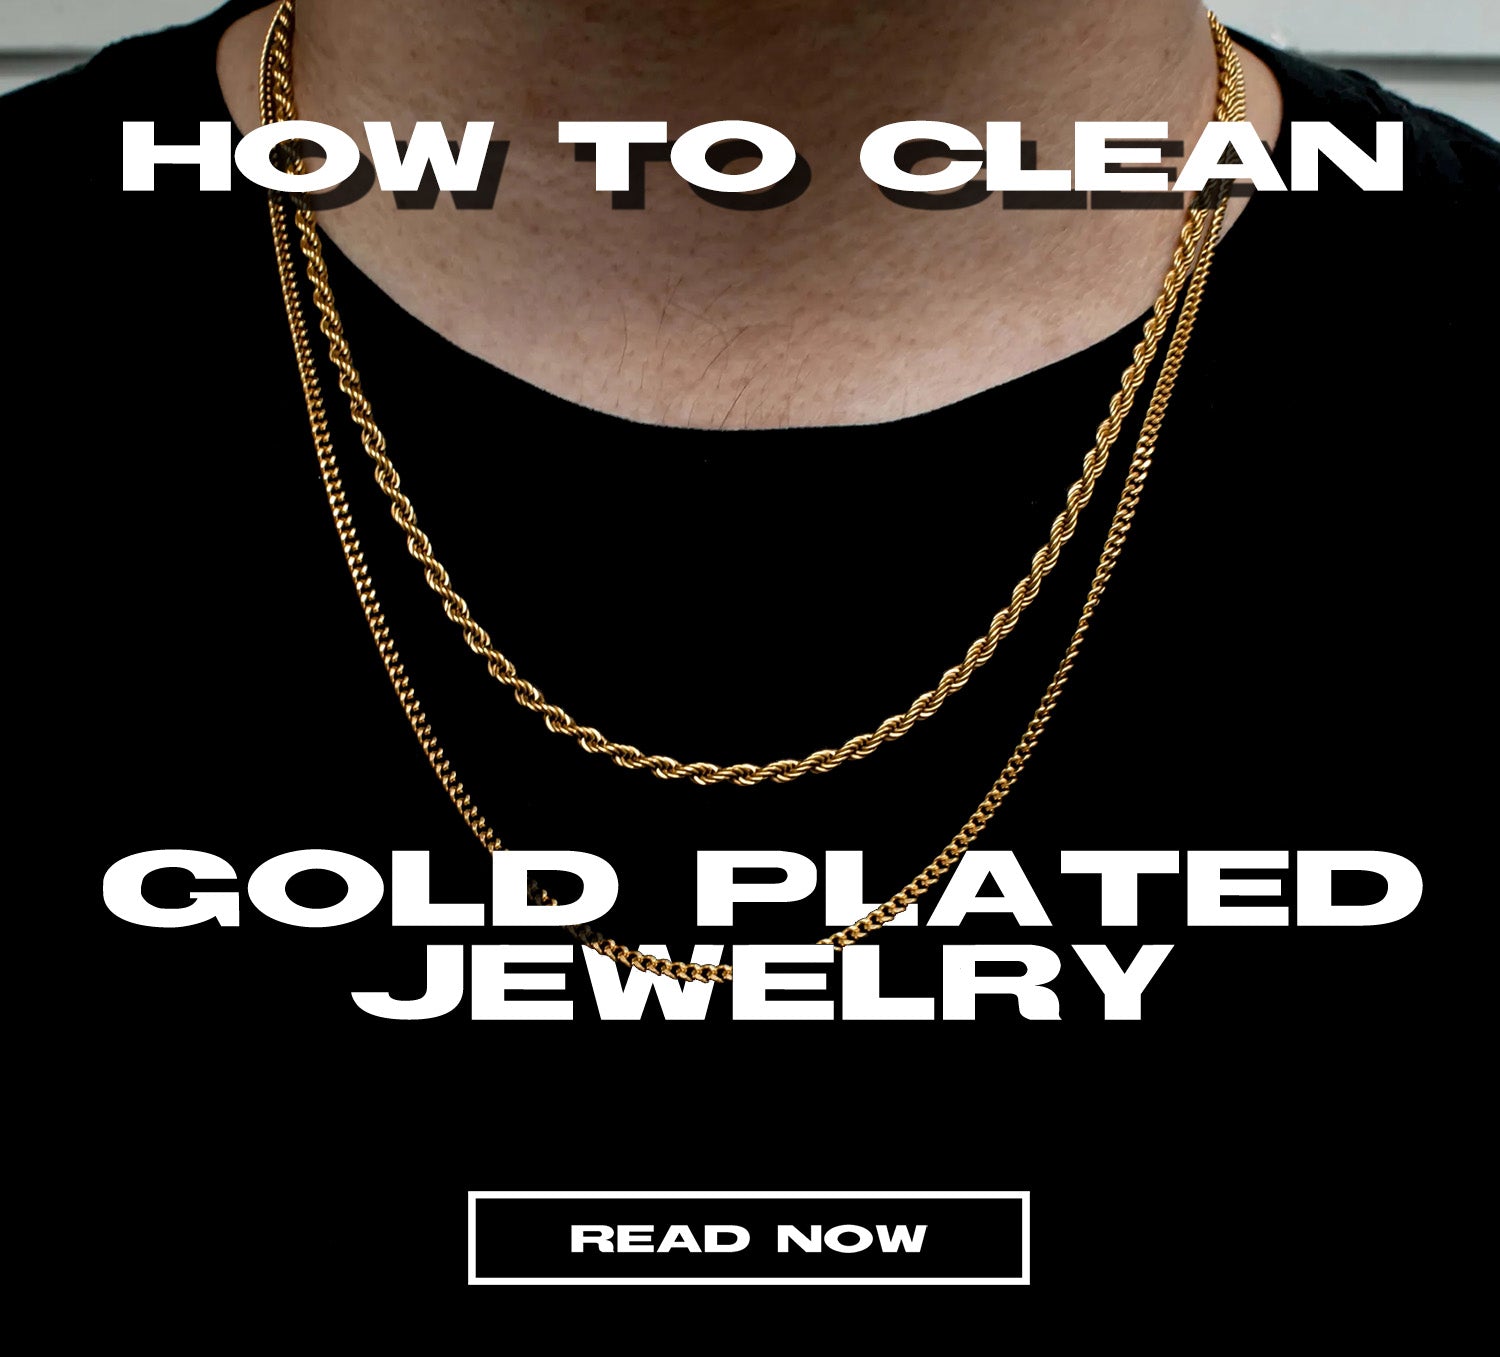 Icetruck: How to Clean Gold Plated Jewerly Banner